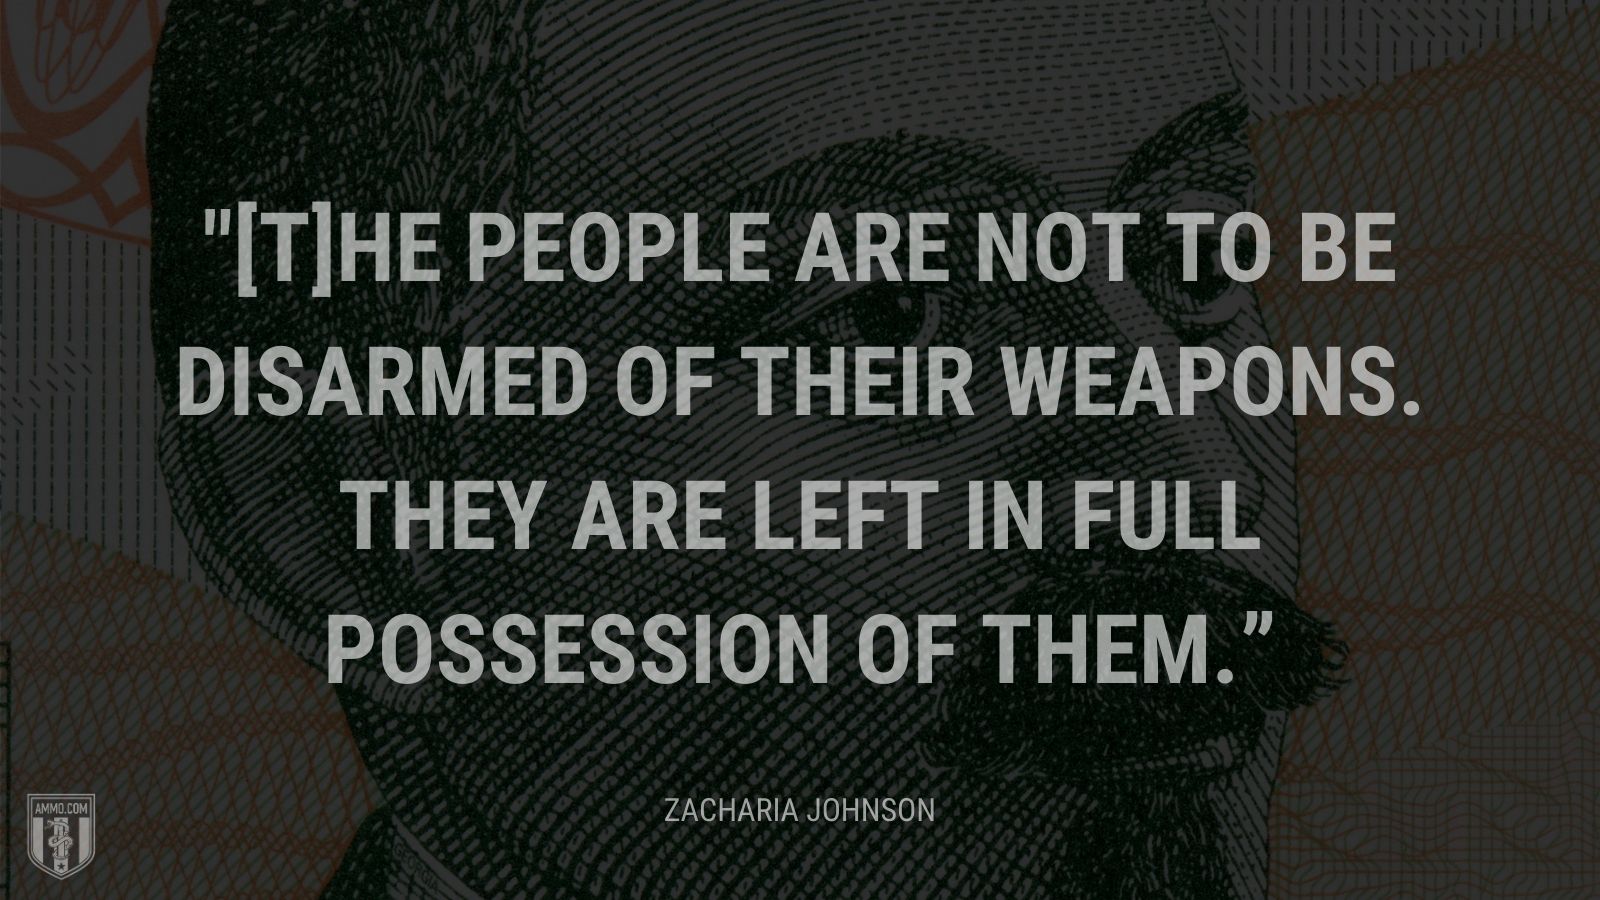 “[T]he people are not to be disarmed of their weapons. They are left in full possession of them.” - Zacharia Johnson